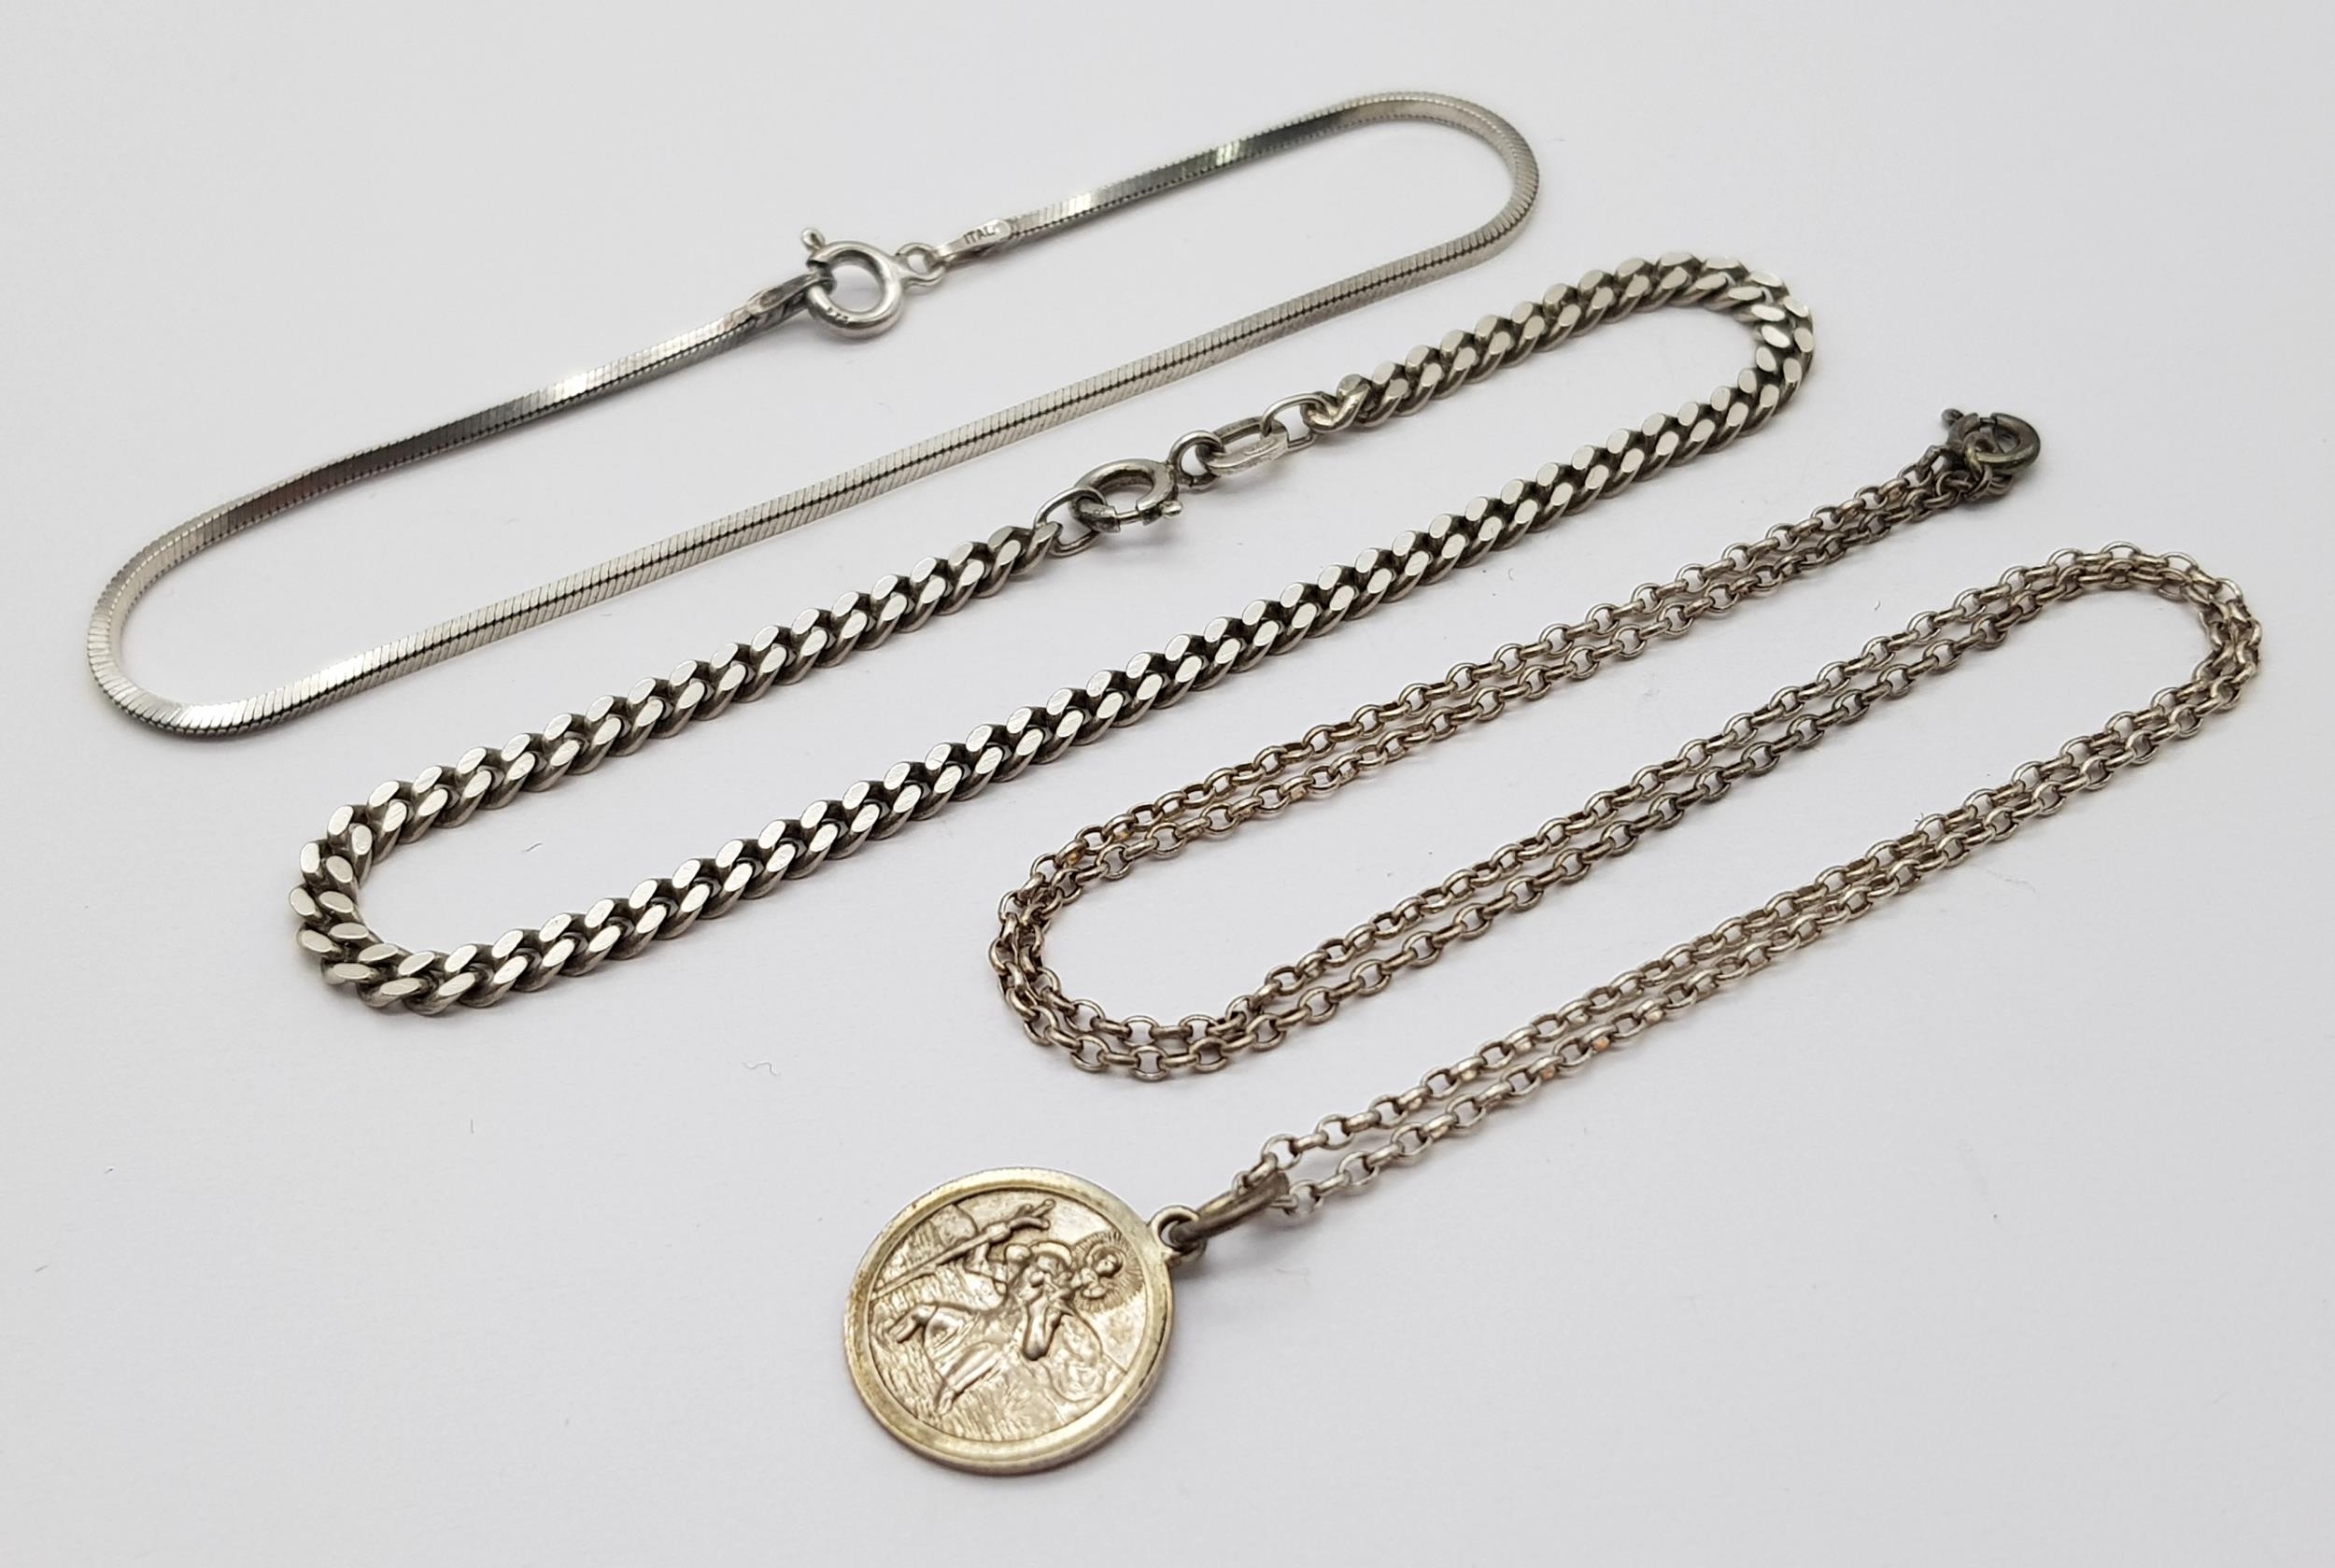 Two Sterling Silver Bracelets and Necklace with a St. Christopher Pendant. 12g